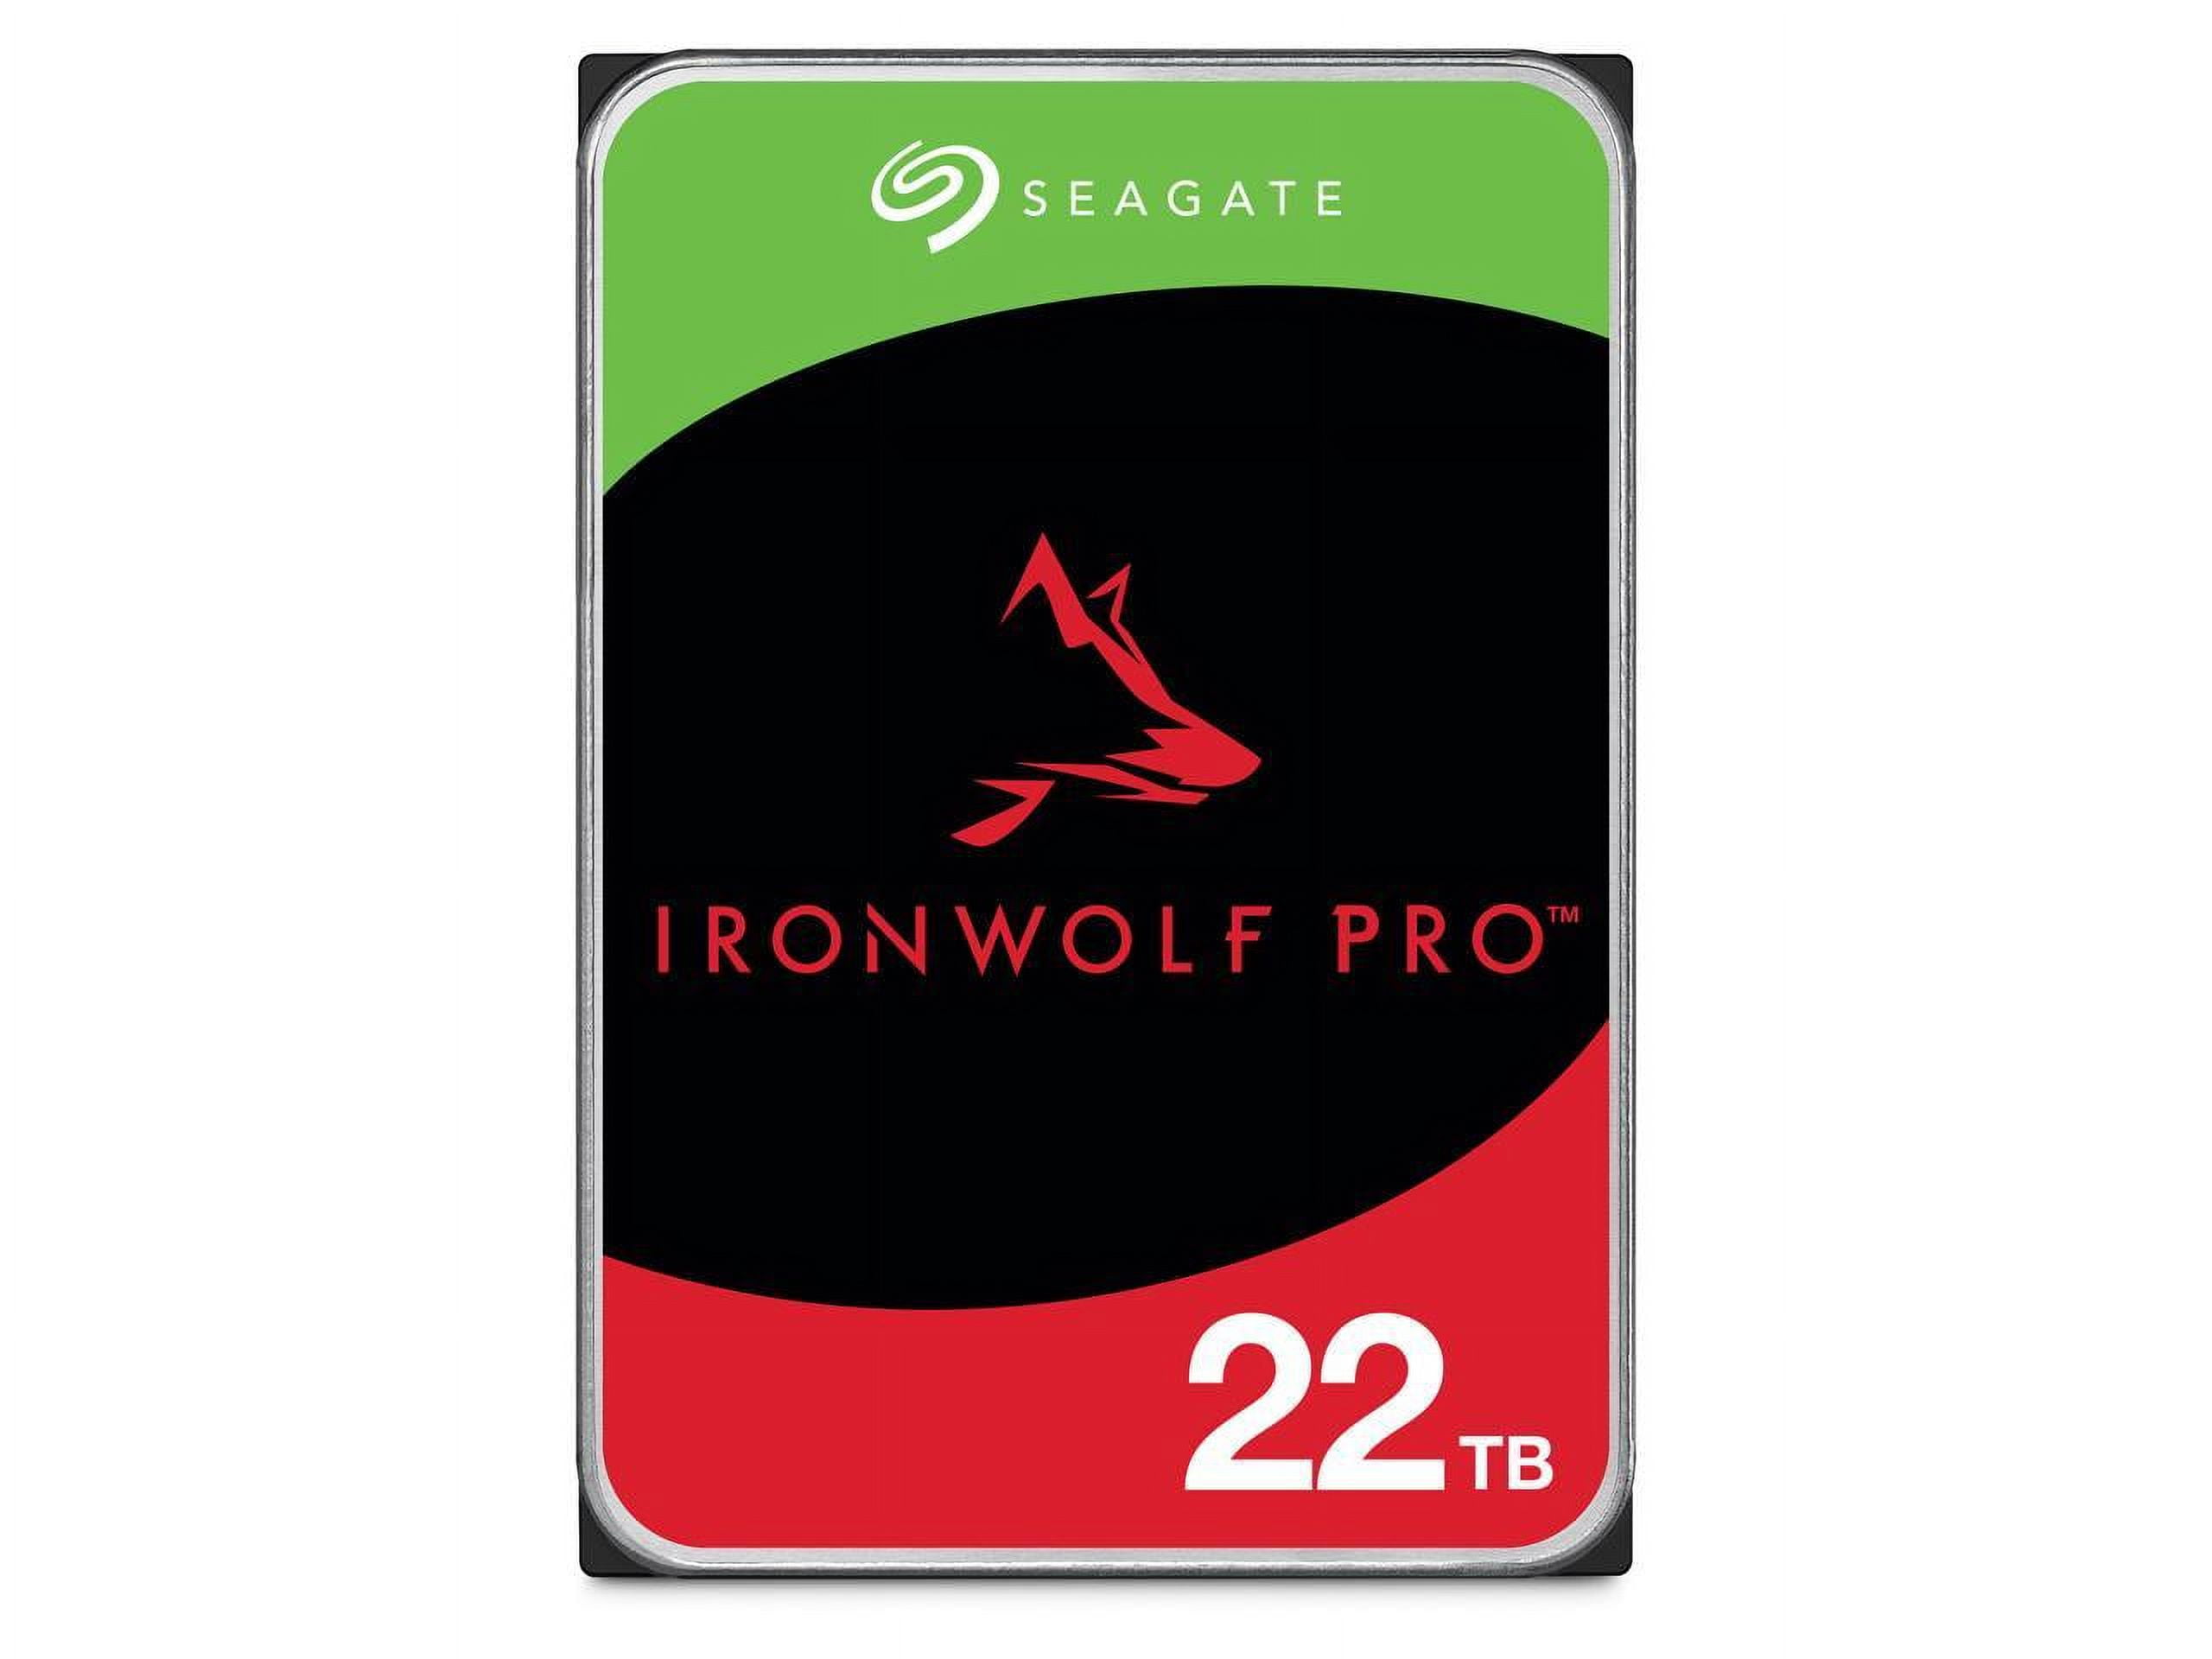 Seagate IronWolf Pro 22TB HDD Capsule Review